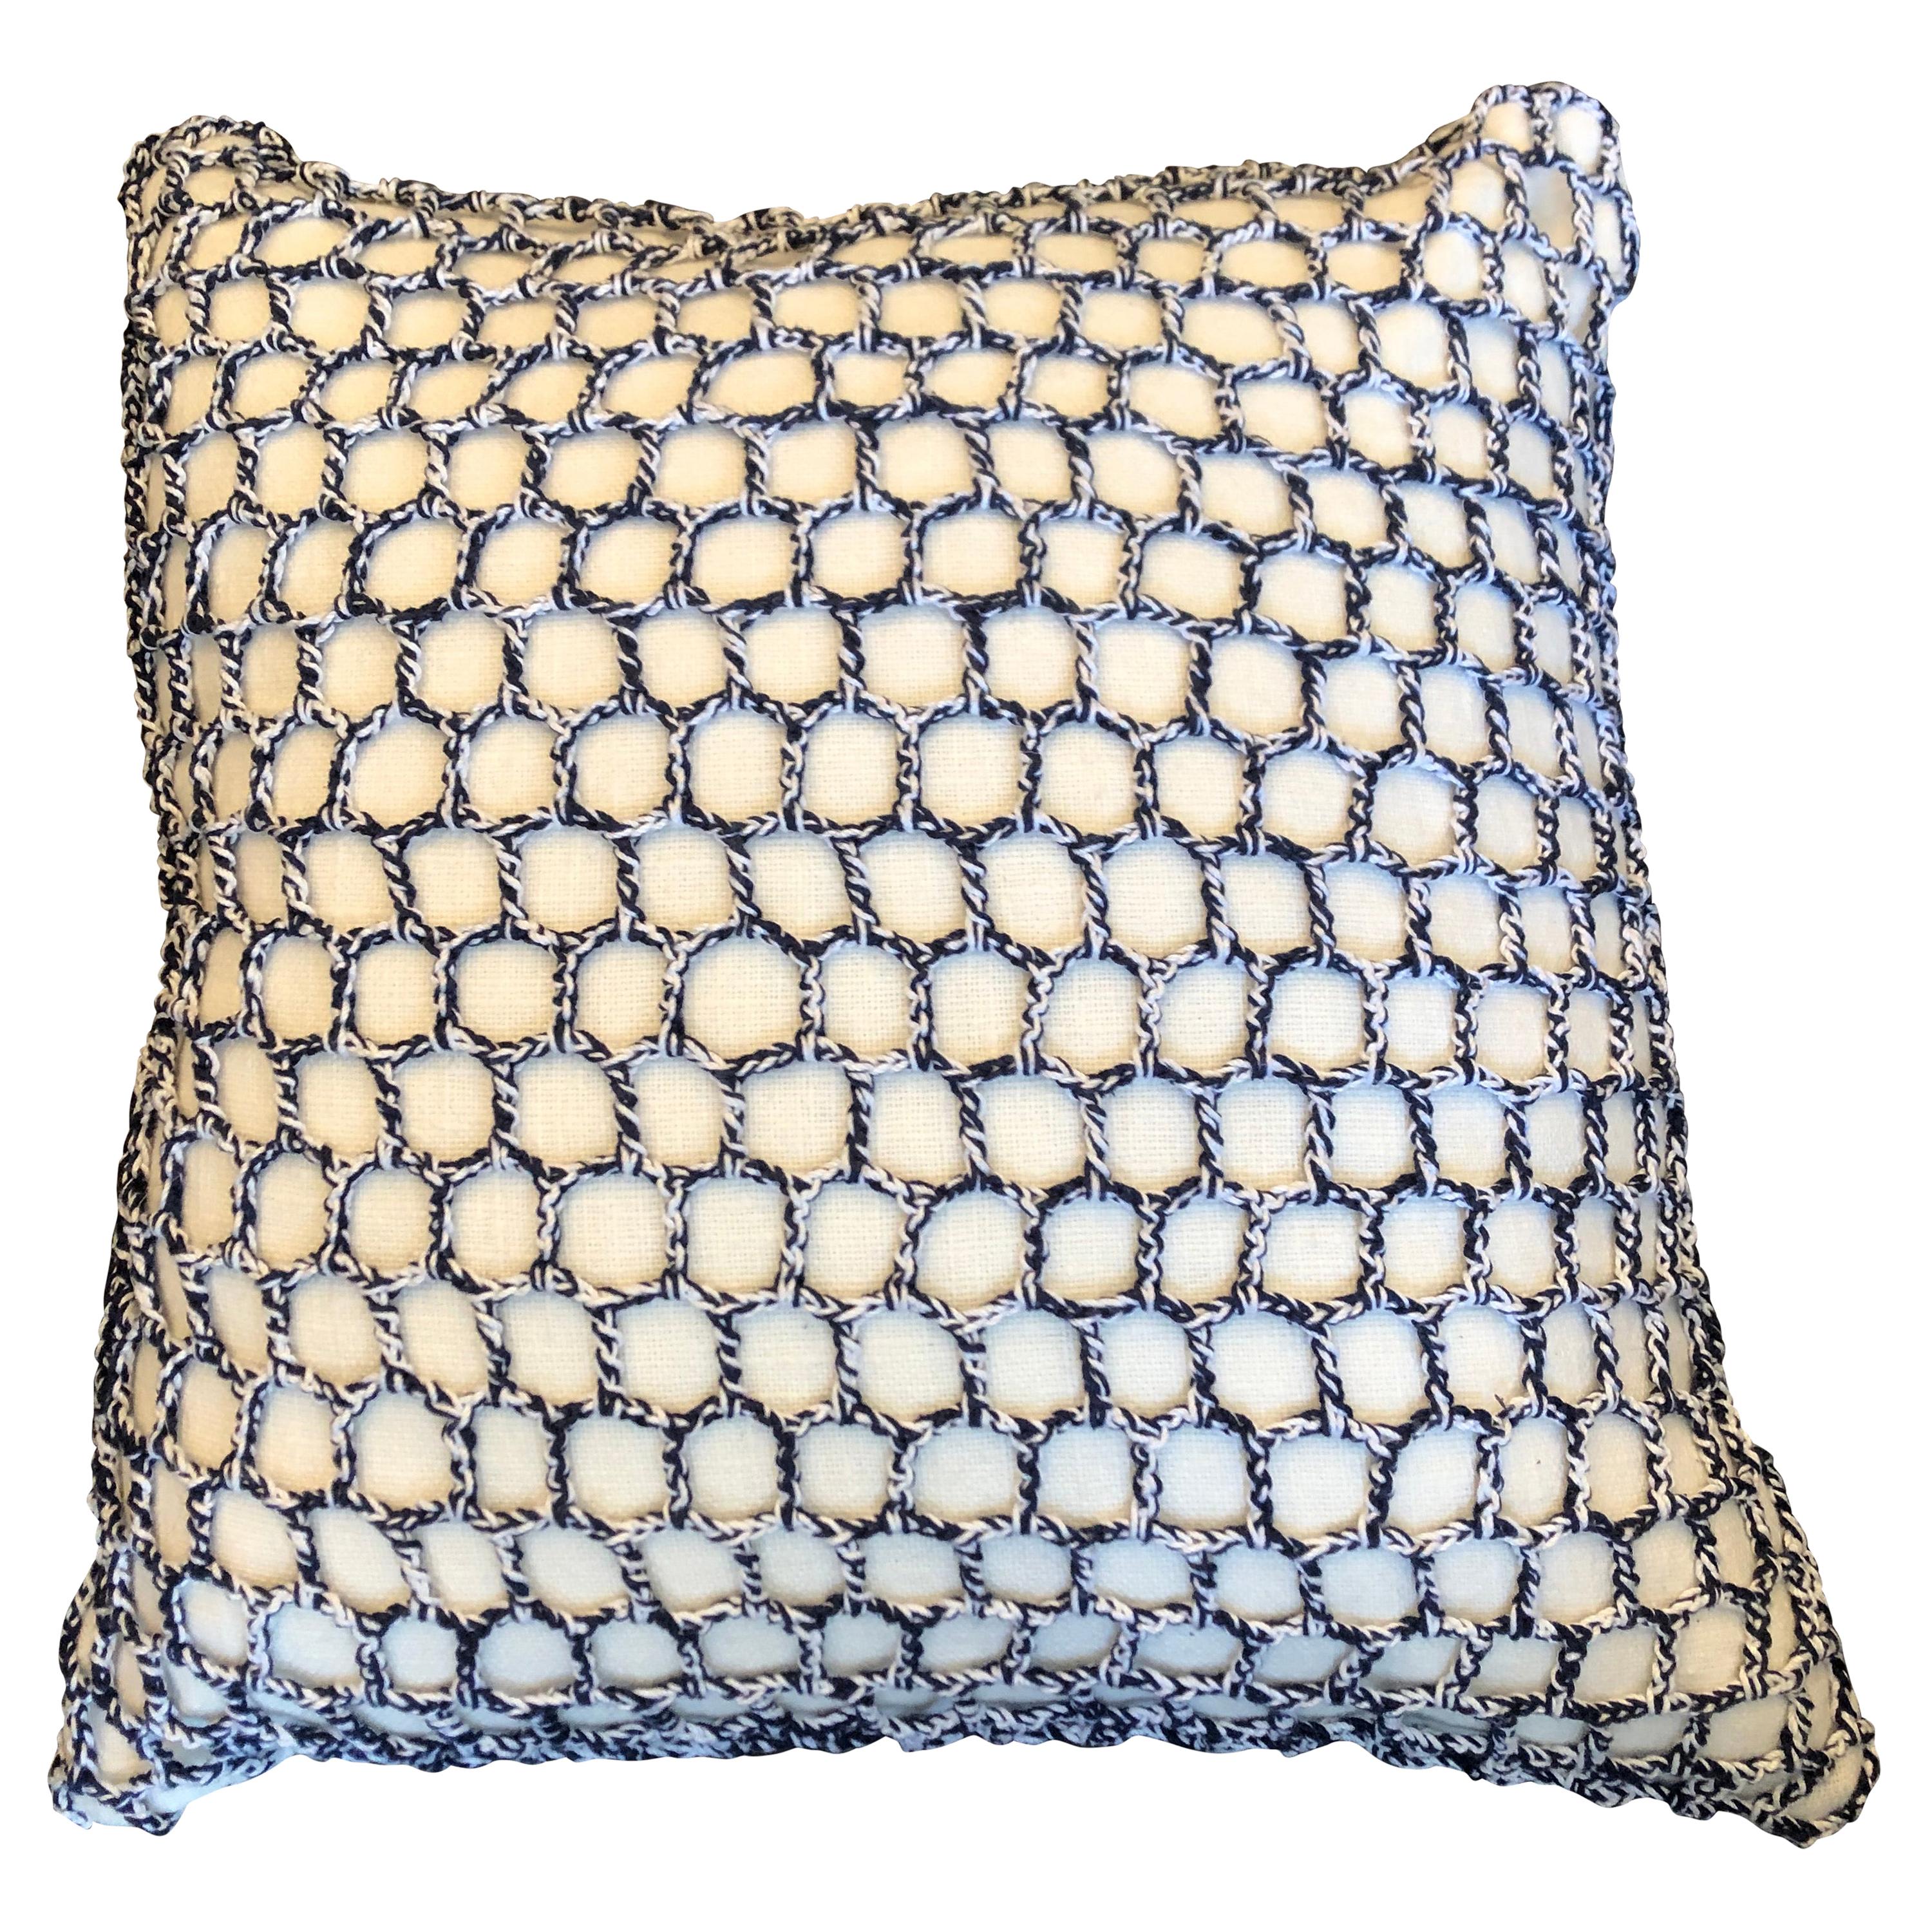  "Anzio" White & Navy Blue Wool Pillow by Le Lampade For Sale